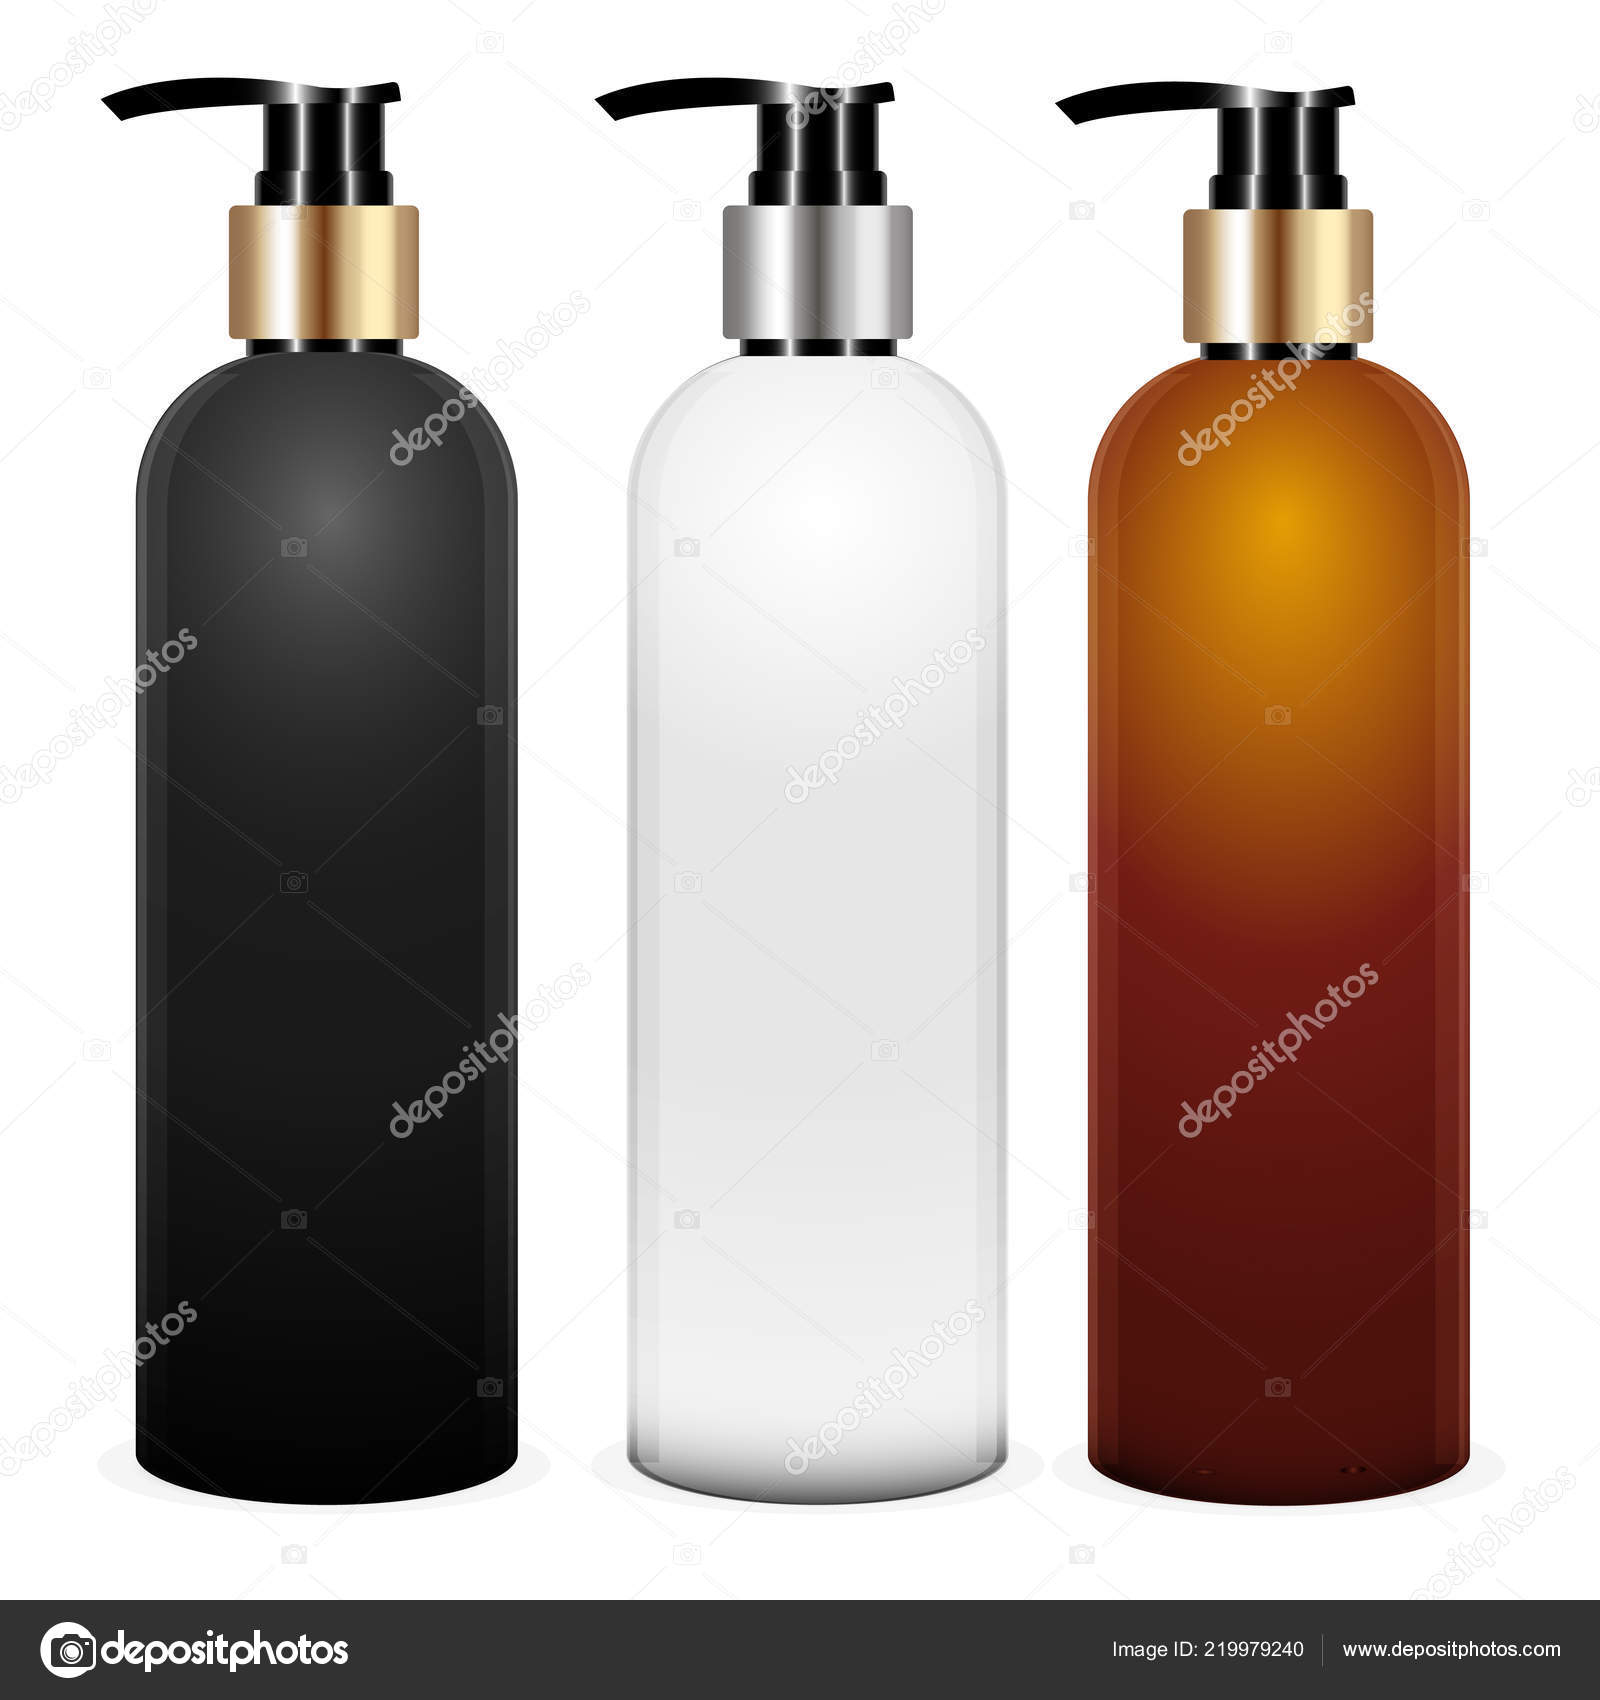 Vector illustration set of plastic bottles, empty containers for